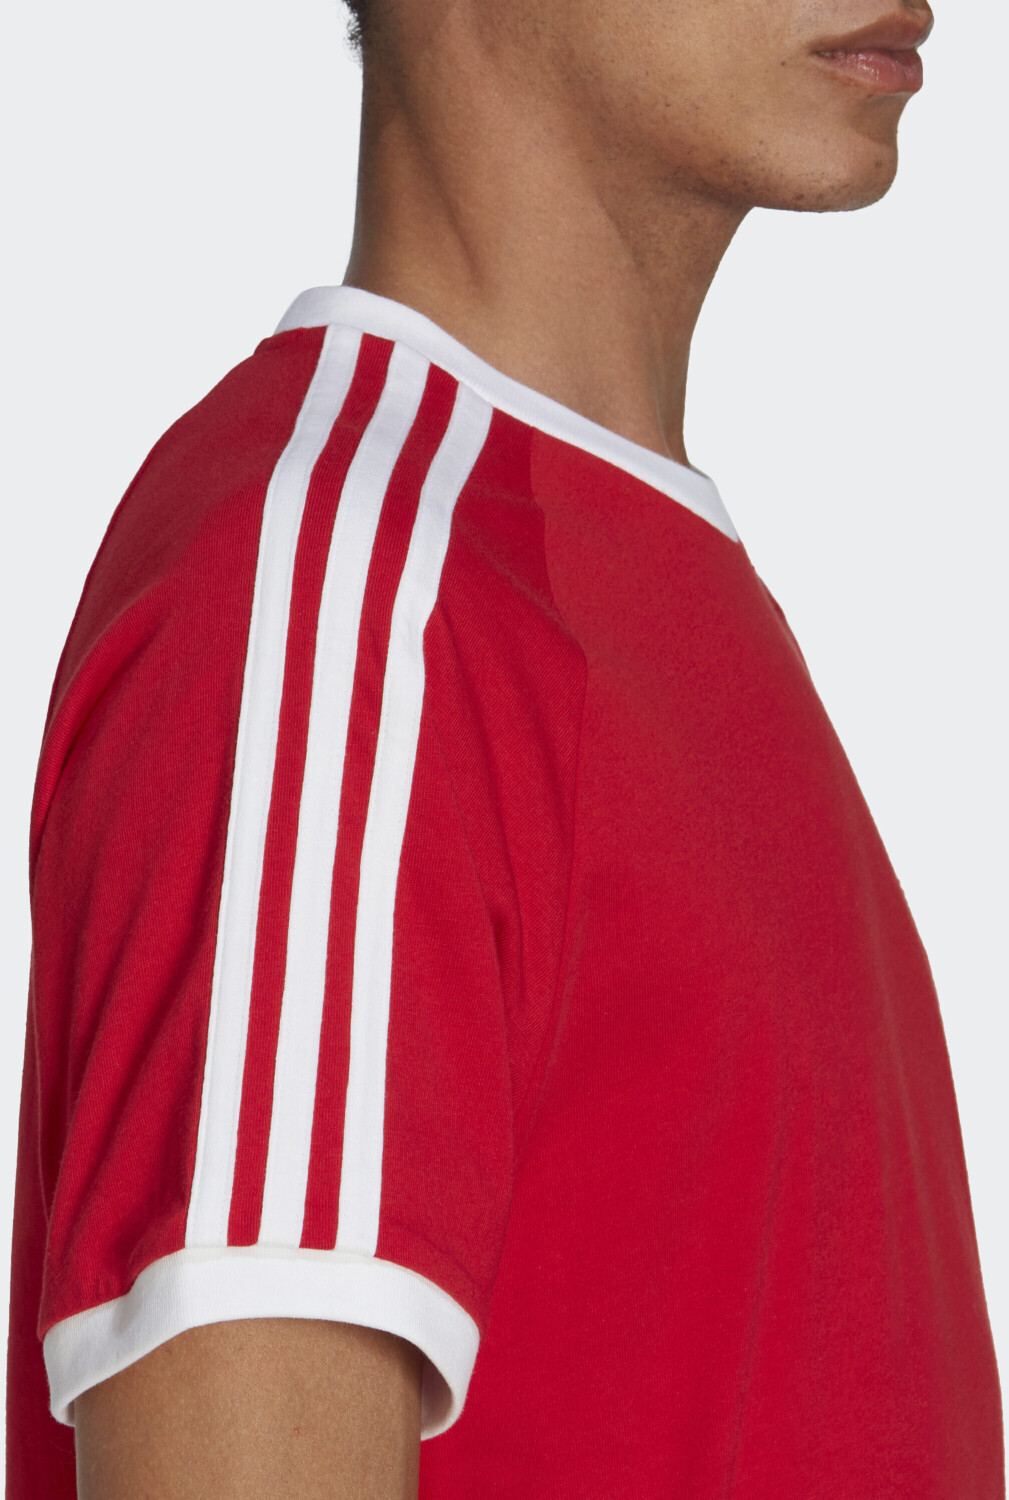 Classics (Today) (IA4852) 3-Stripes better T-Shirt – scarlet Buy on £27.99 from Adidas Deals Adicolor Best